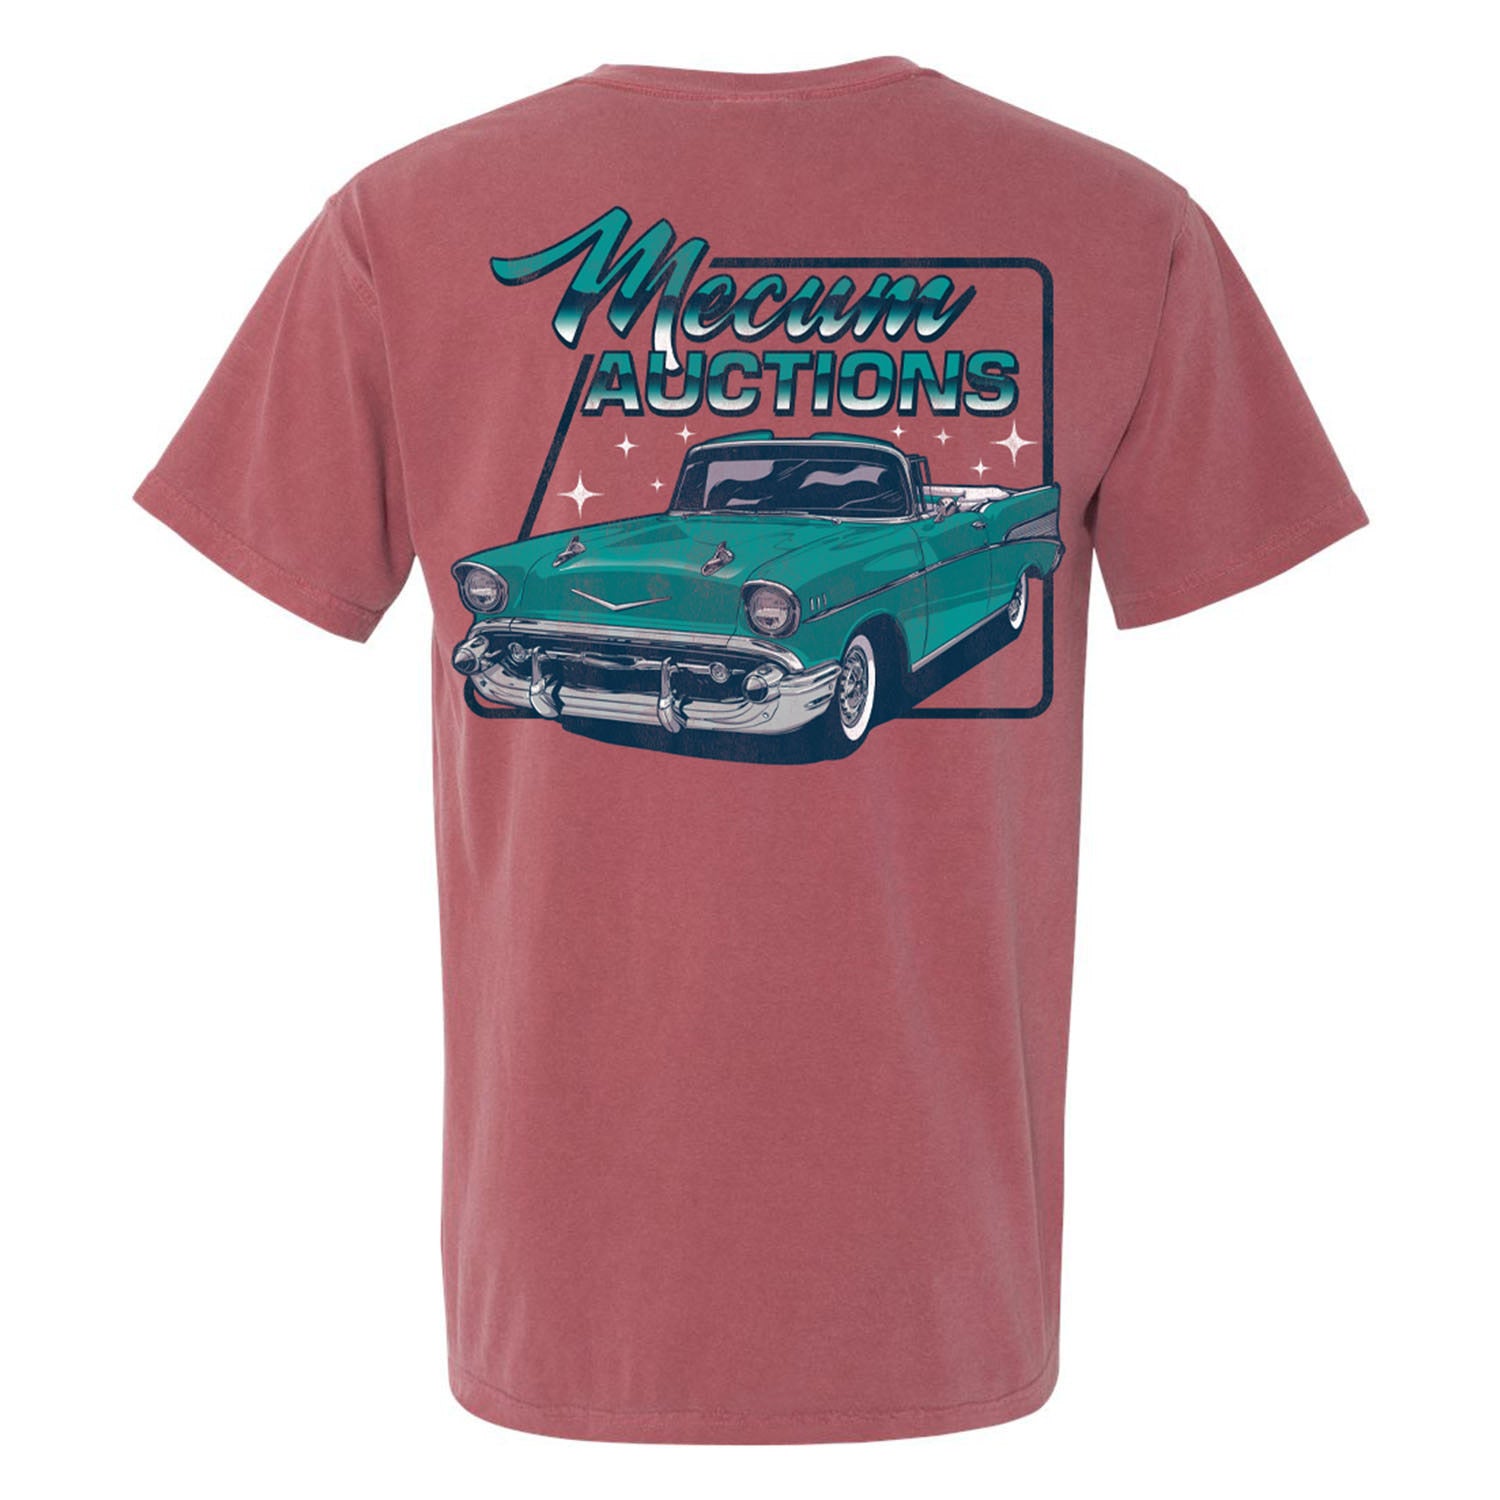 Mecum Auctions Vintage Brick Pocket T-Shirt in Red - Back View